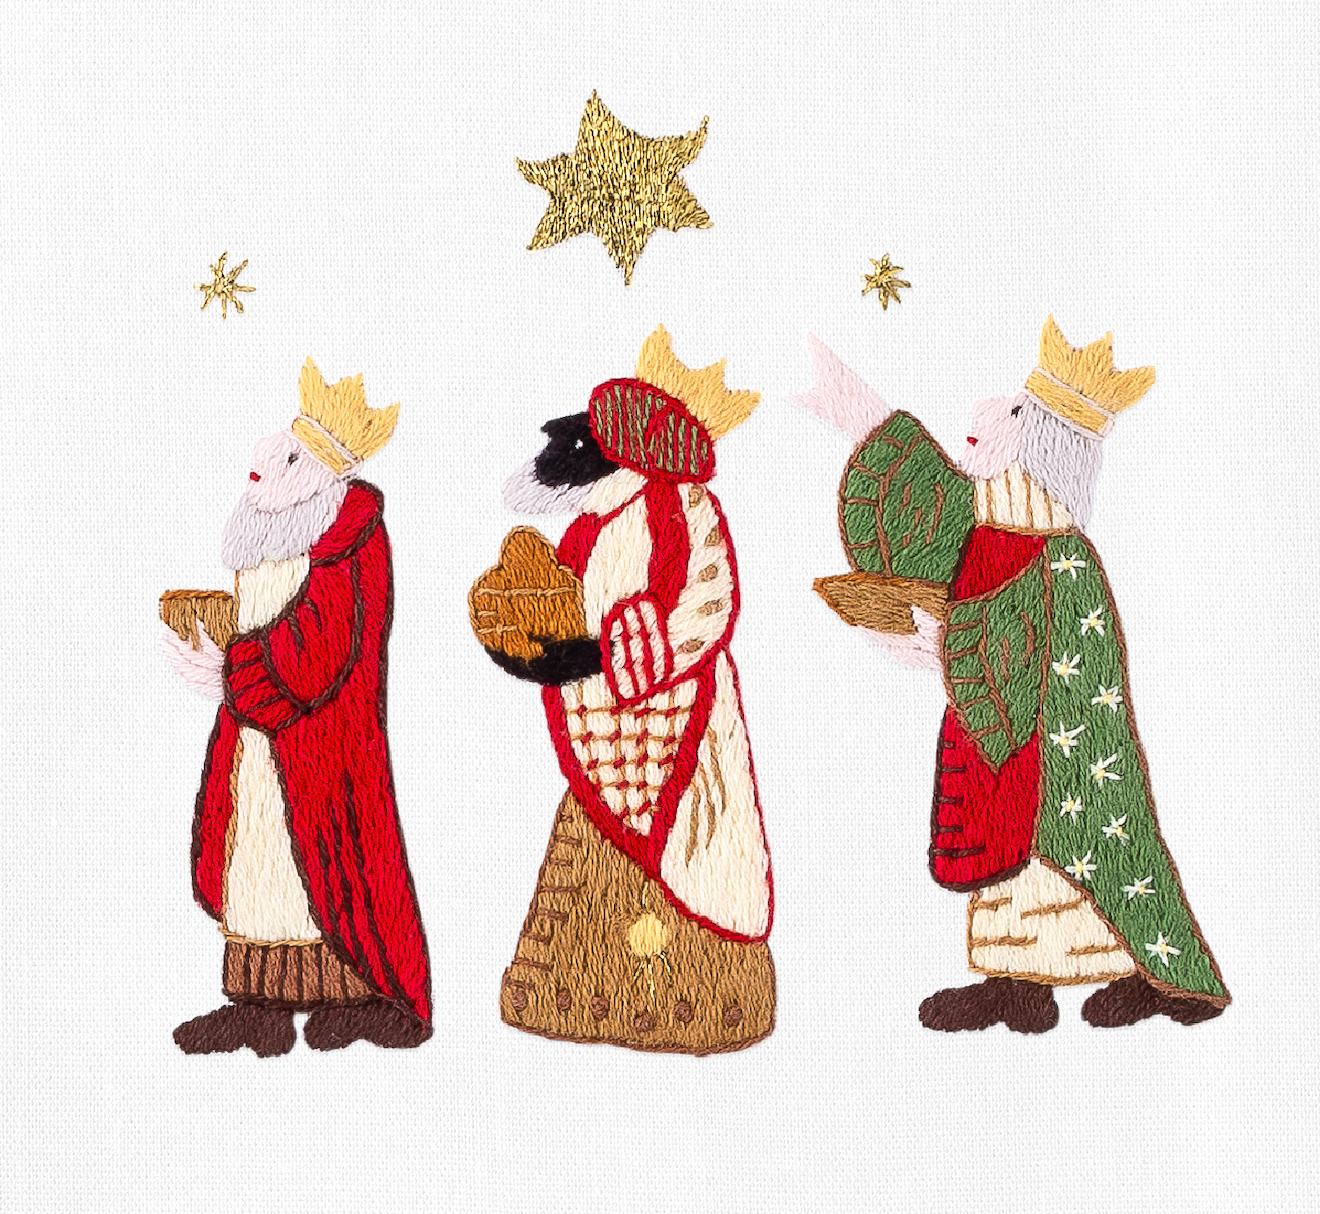 A detailed image of the embroidery - The 3 wise men carrying gifts & following a north star 